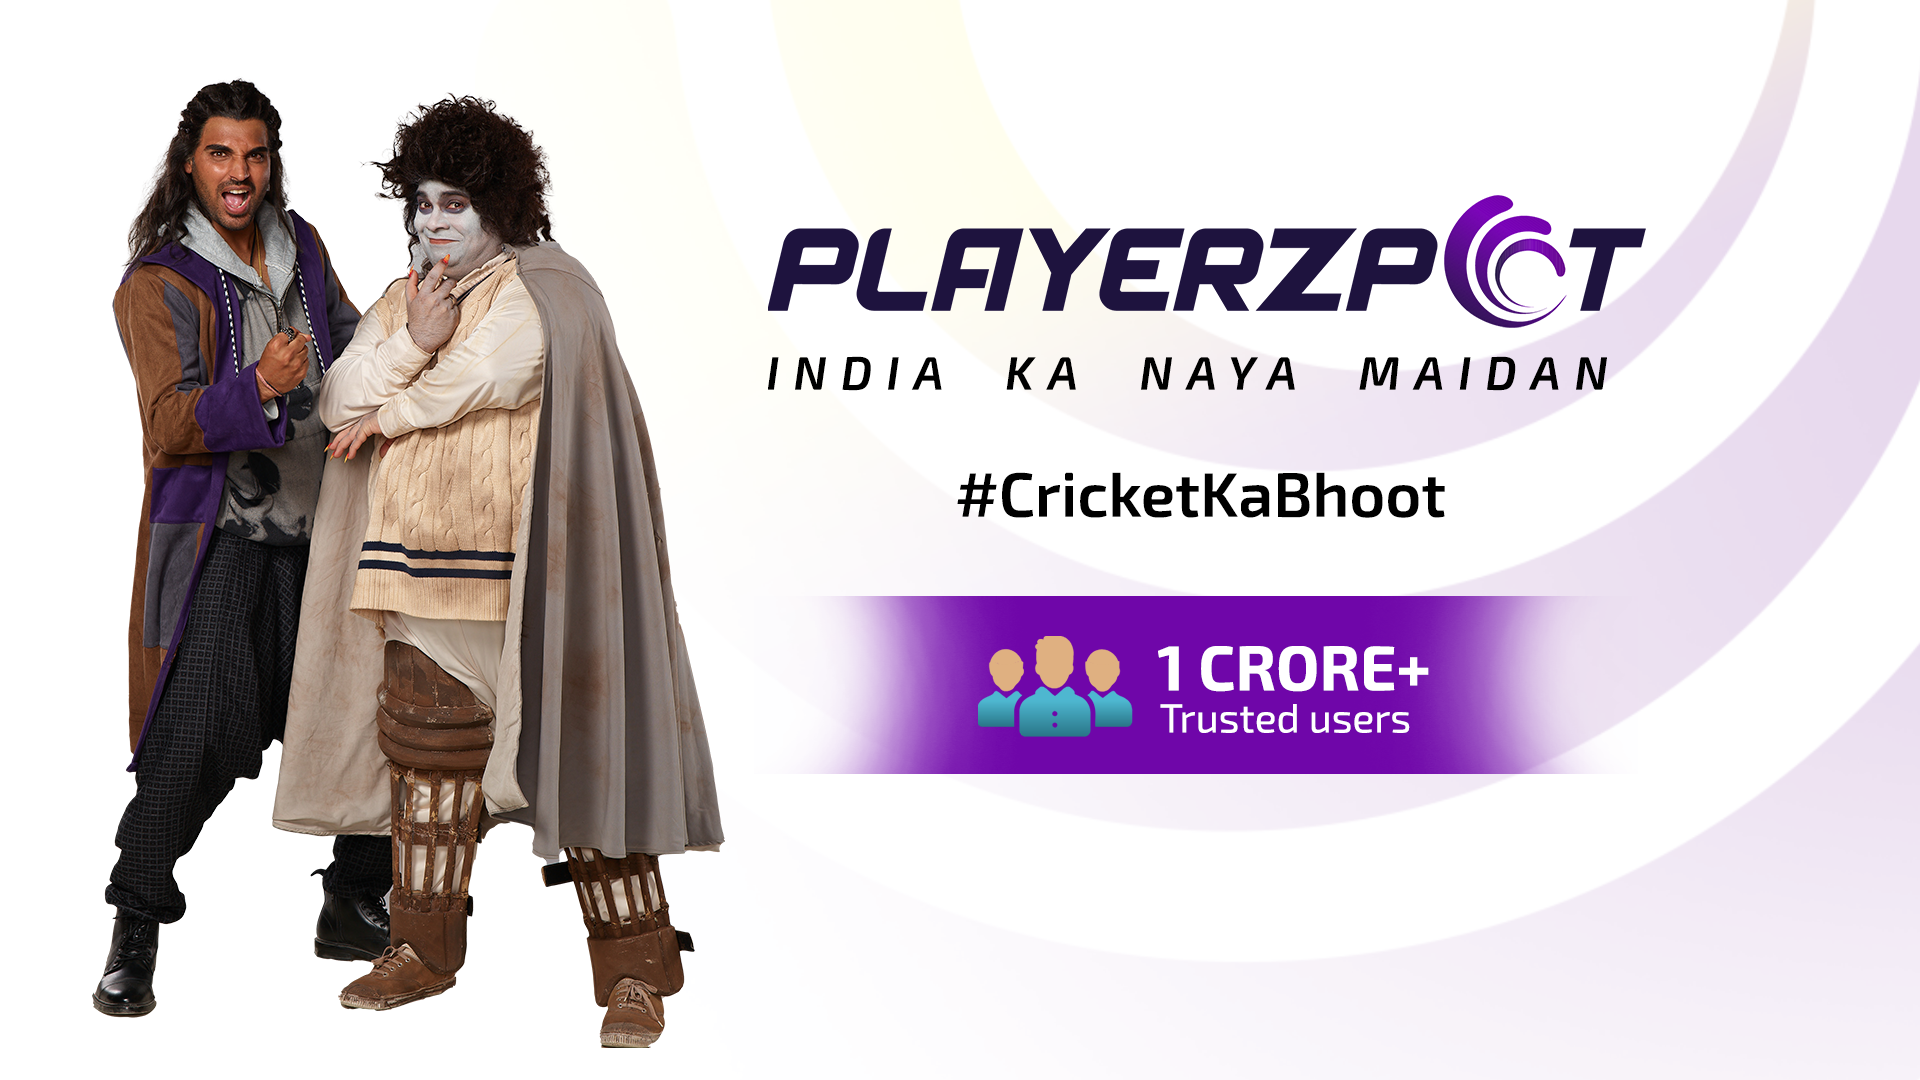 PlayerzPot welcomes IPL Season 15 with the new campaign #CricketKaBhoot